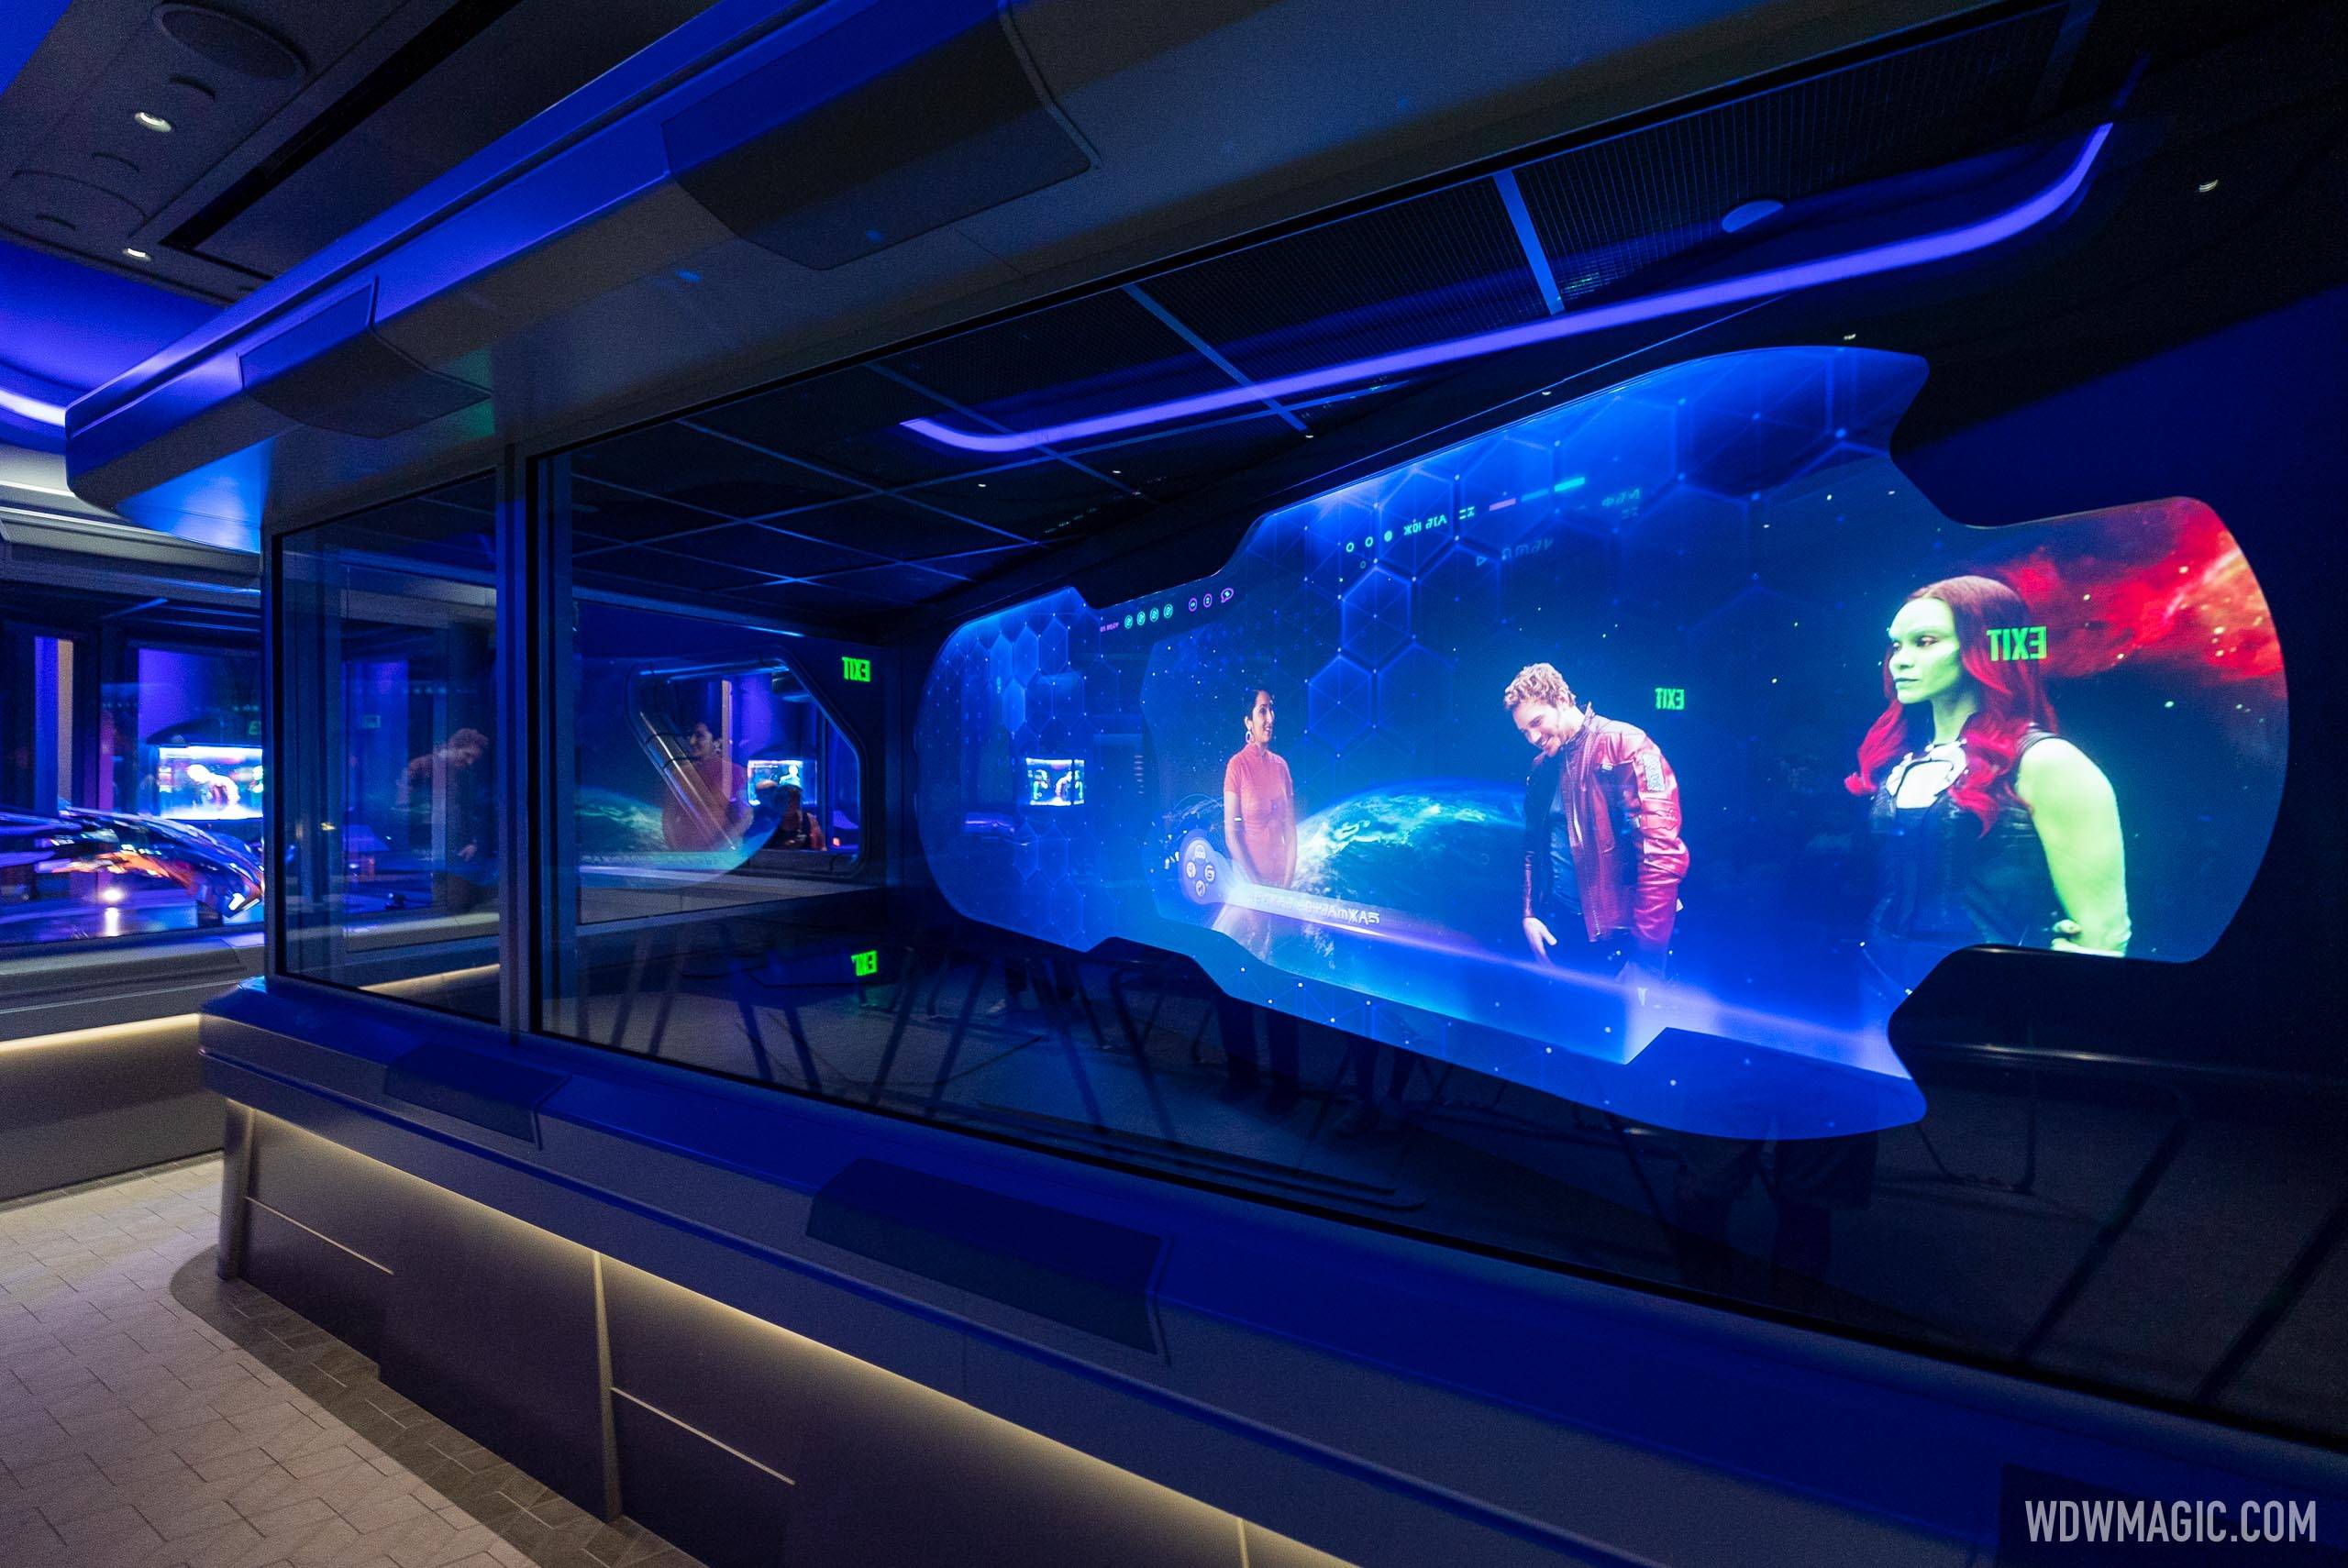 News segment in the gallery that introduces the Guardians of the Galaxy